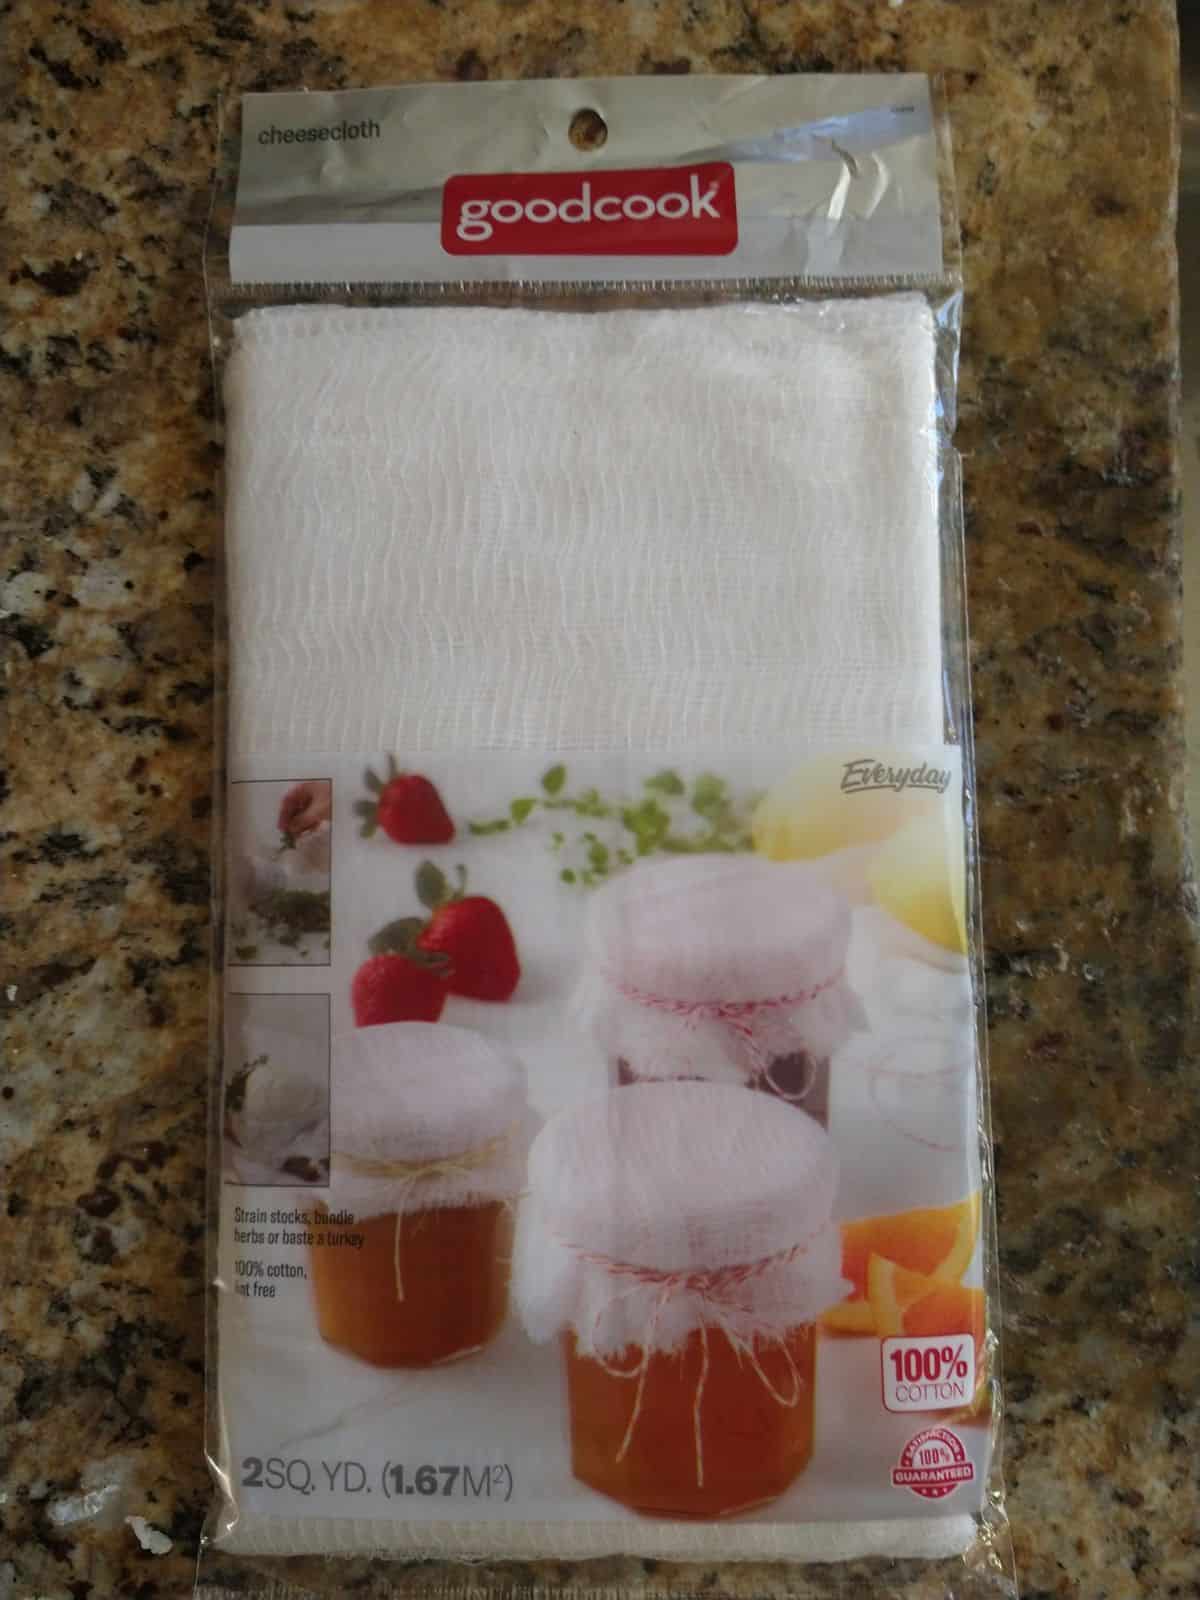 A package of Goodcook cheesecloth sitting on a granite countertop.